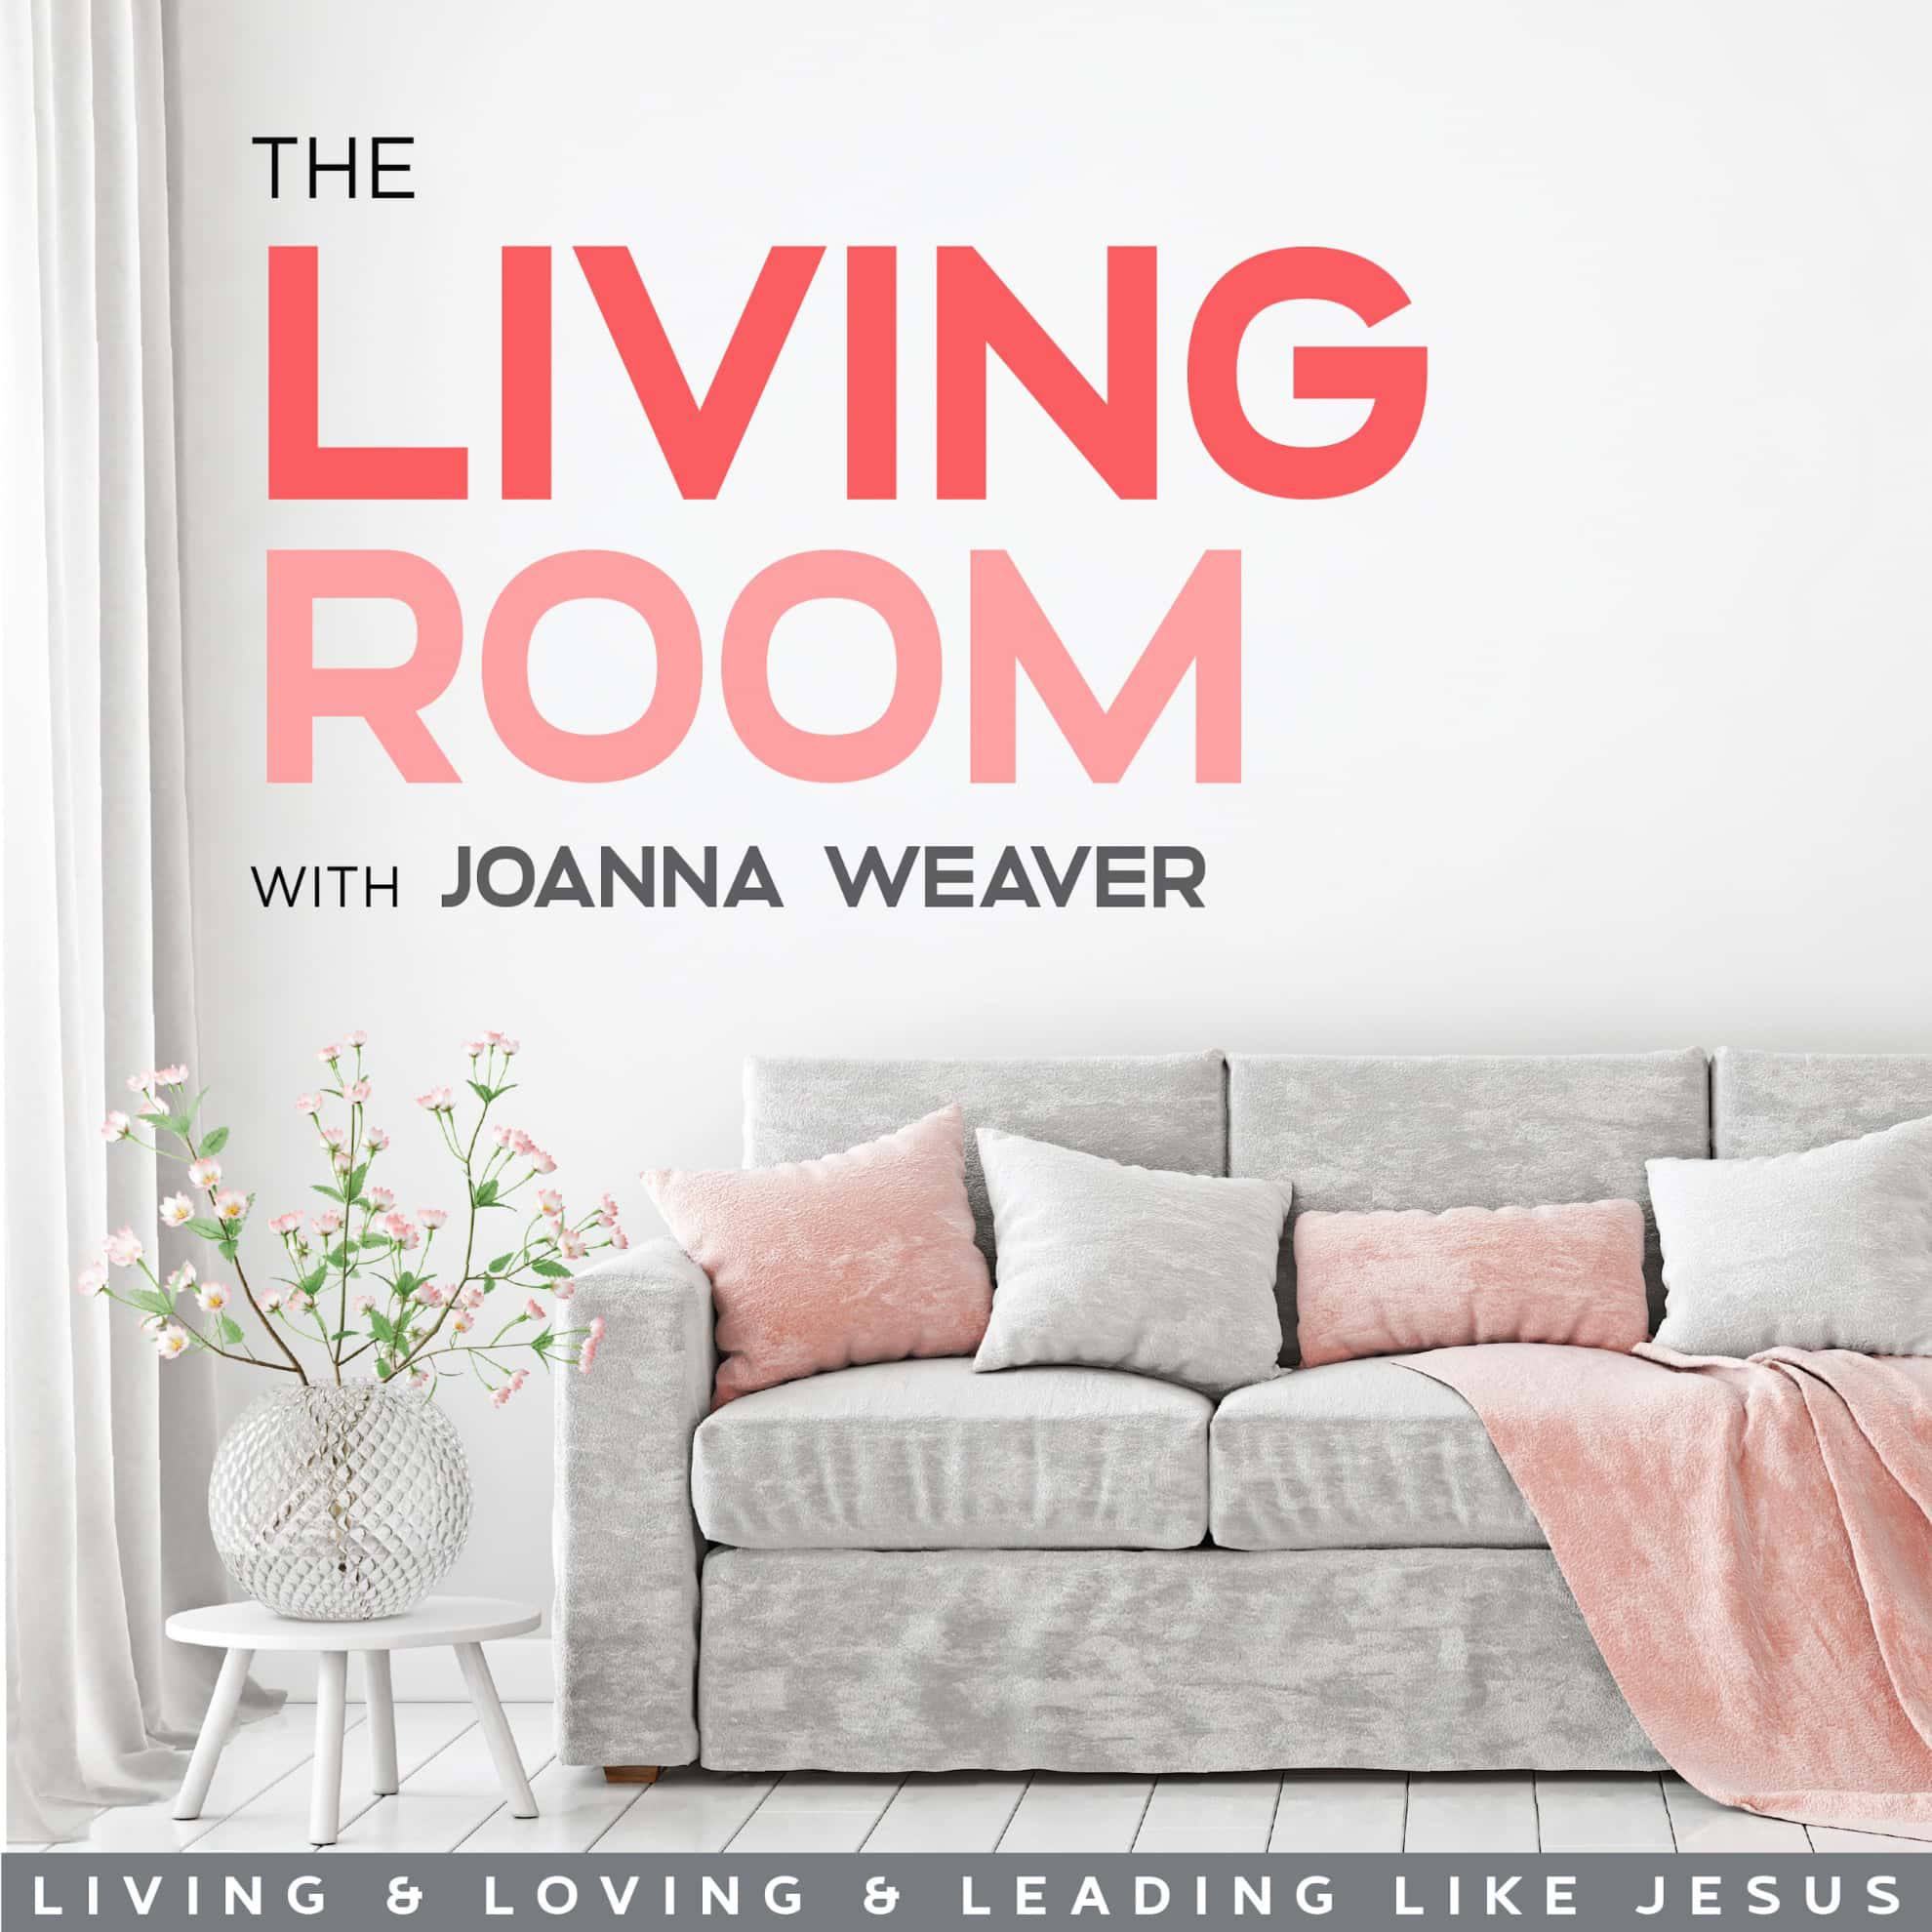 A highlight from 070: Holding On When You Want to Let Go with Sheila Walsh | The Living Room